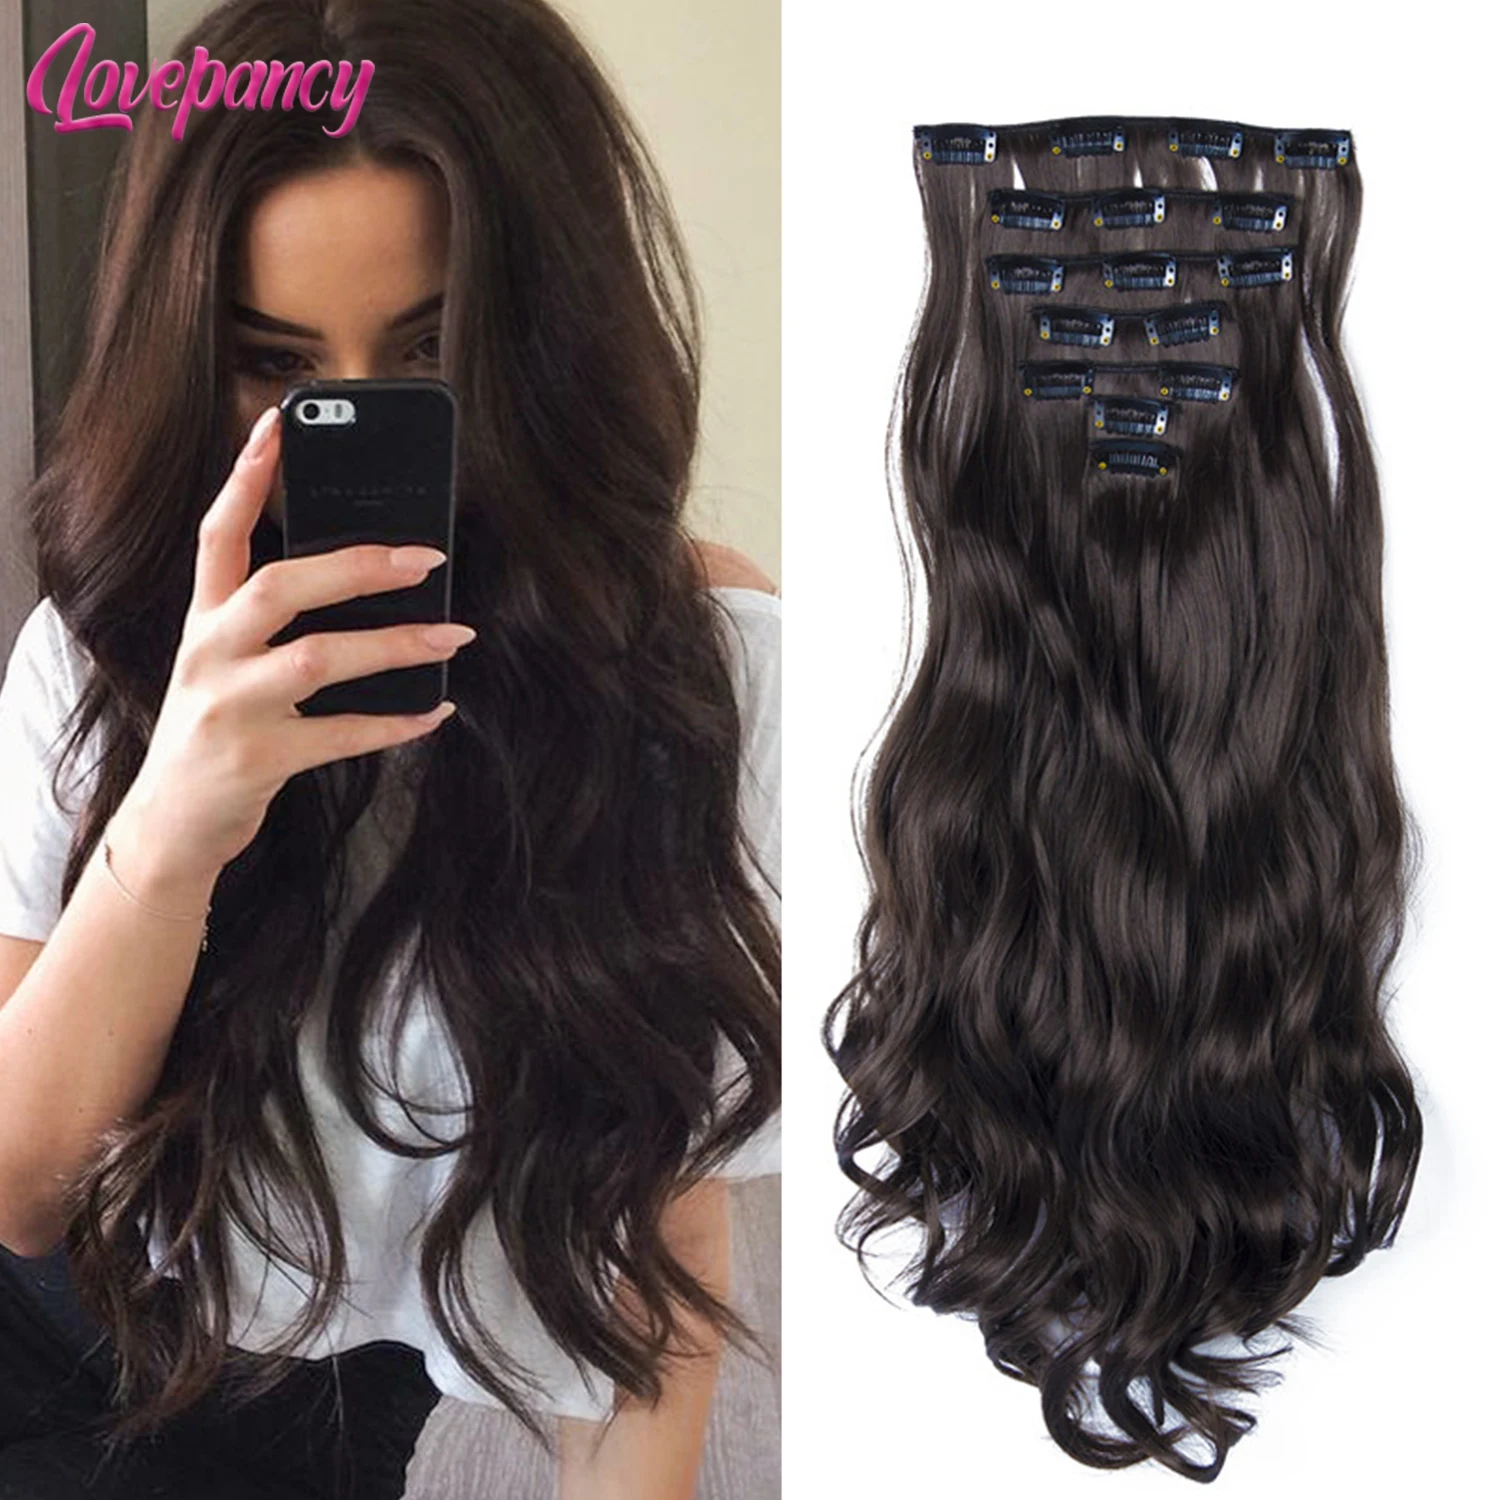 

Lovepancy 22inch Ombre Long curly Hair Extension 7pcs/set 16 Clips High Tempreture Synthetic Hairpiece Clip in Hair Extensions